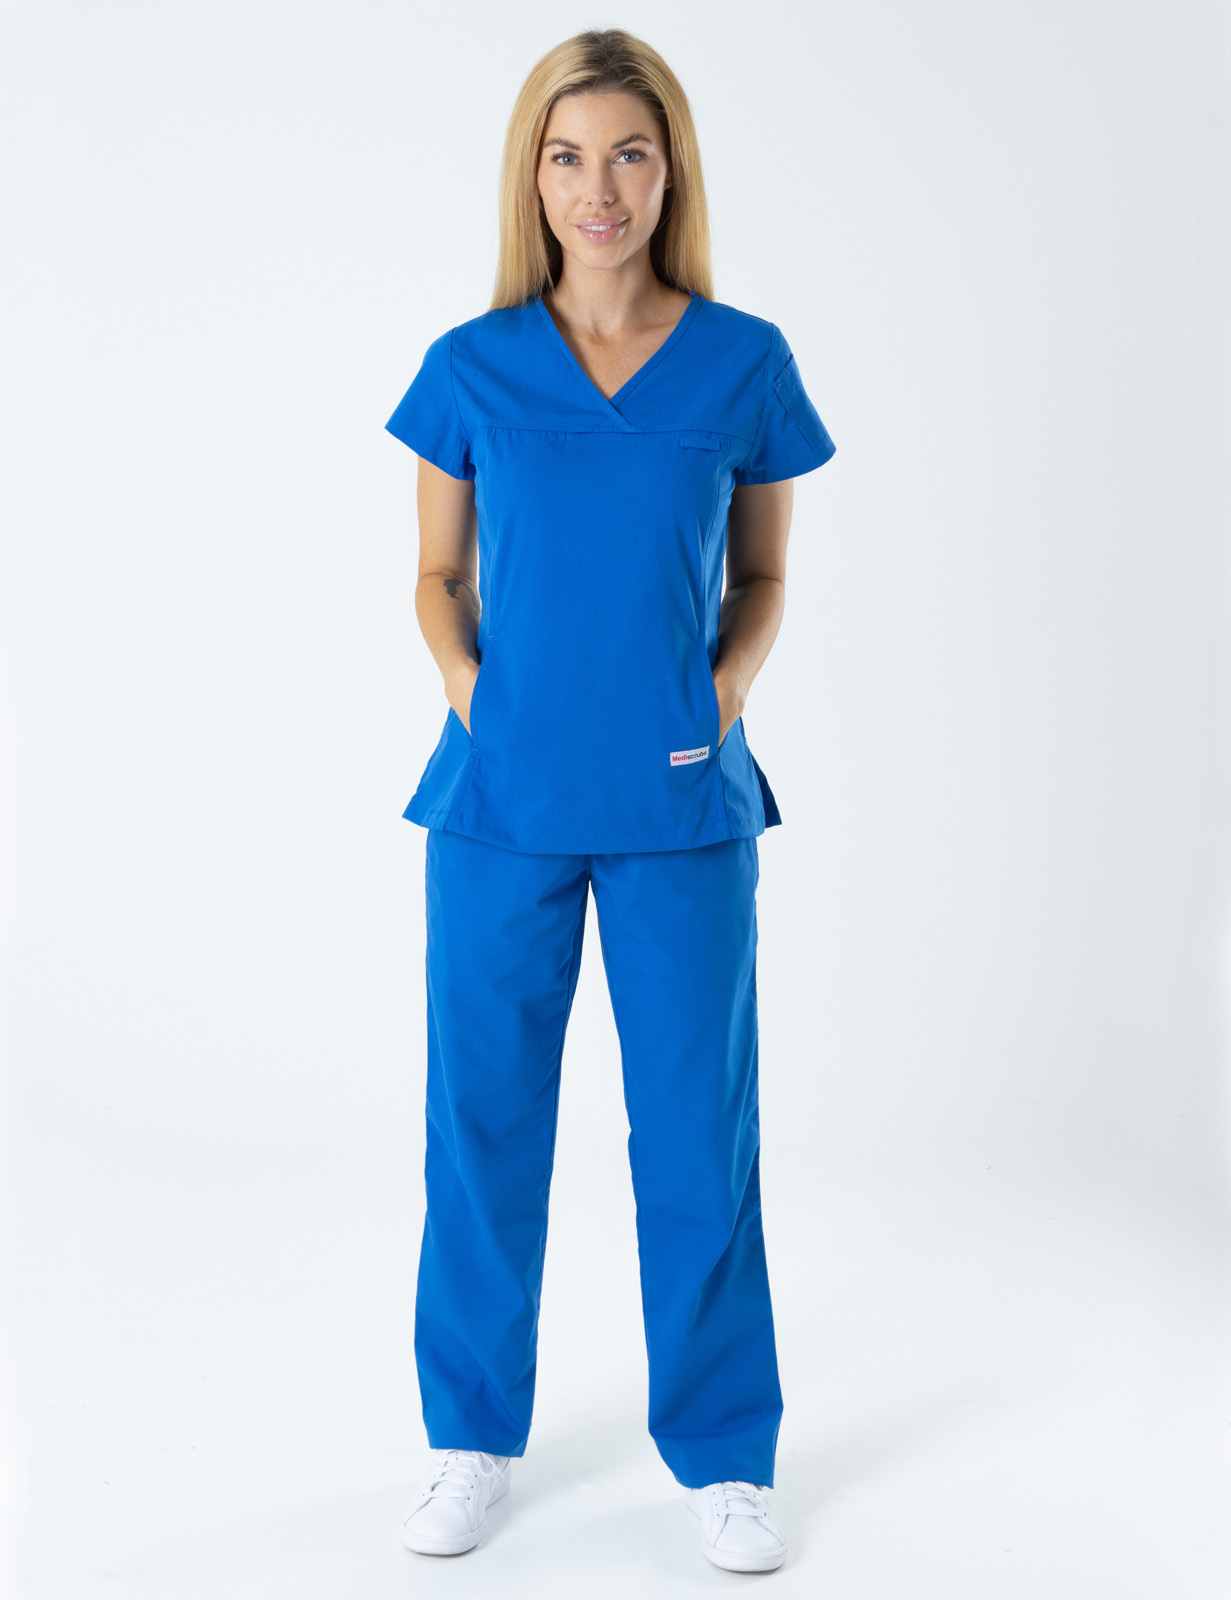 Children's Hospital Melbourne - ED (Women's Fit Solid Scrub Top and Cargo Pants in Royal incl Logos)